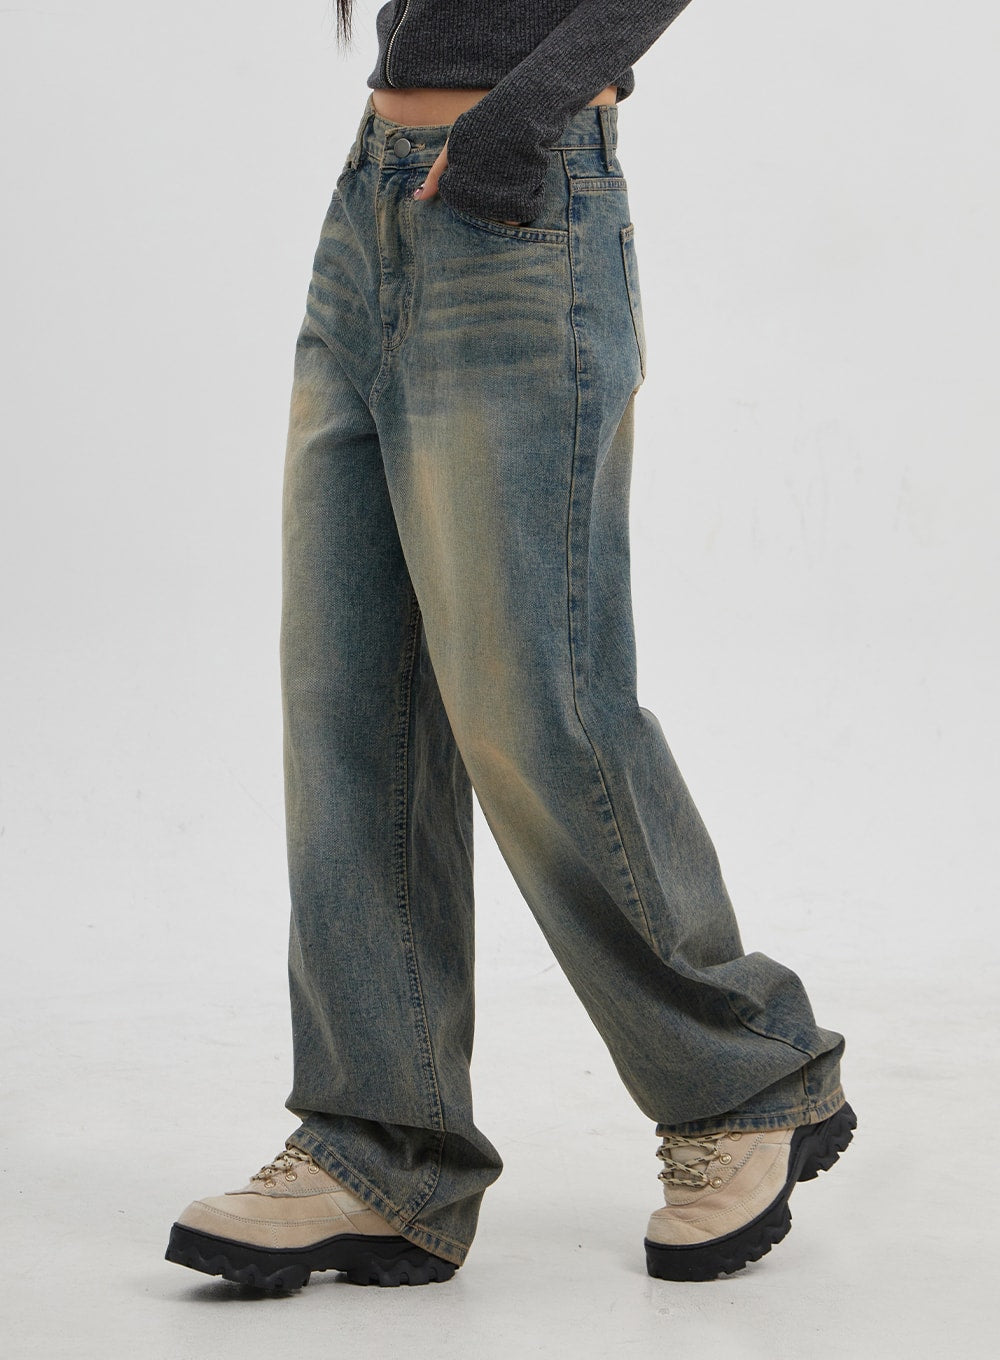 Women's Baggy Jeans in Dayle Vintage Wash